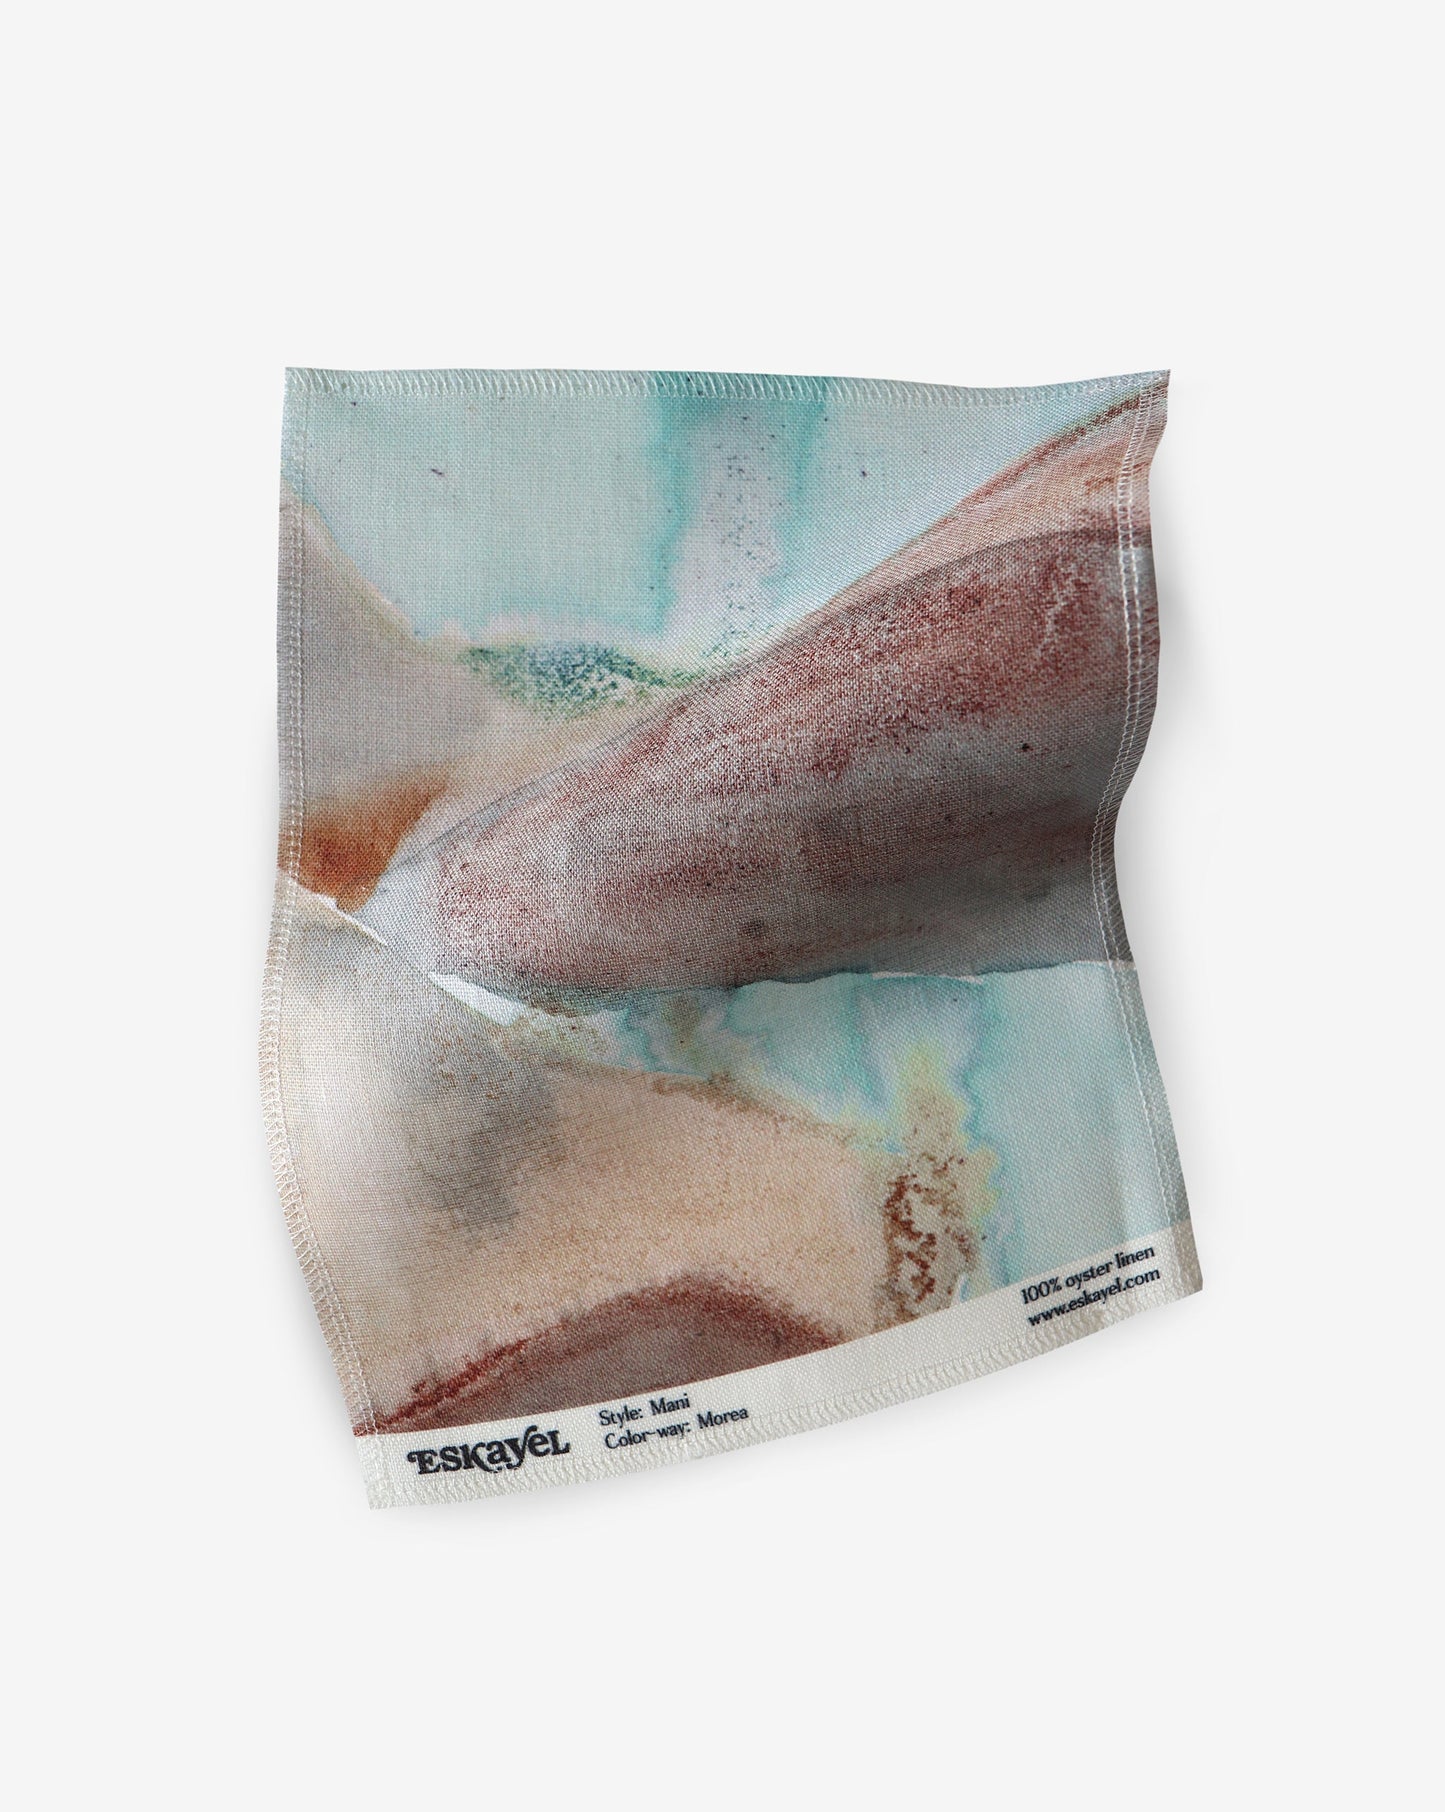 A fabric with an image of a woman's leg is available for as a Mani Fabric Sample Morea